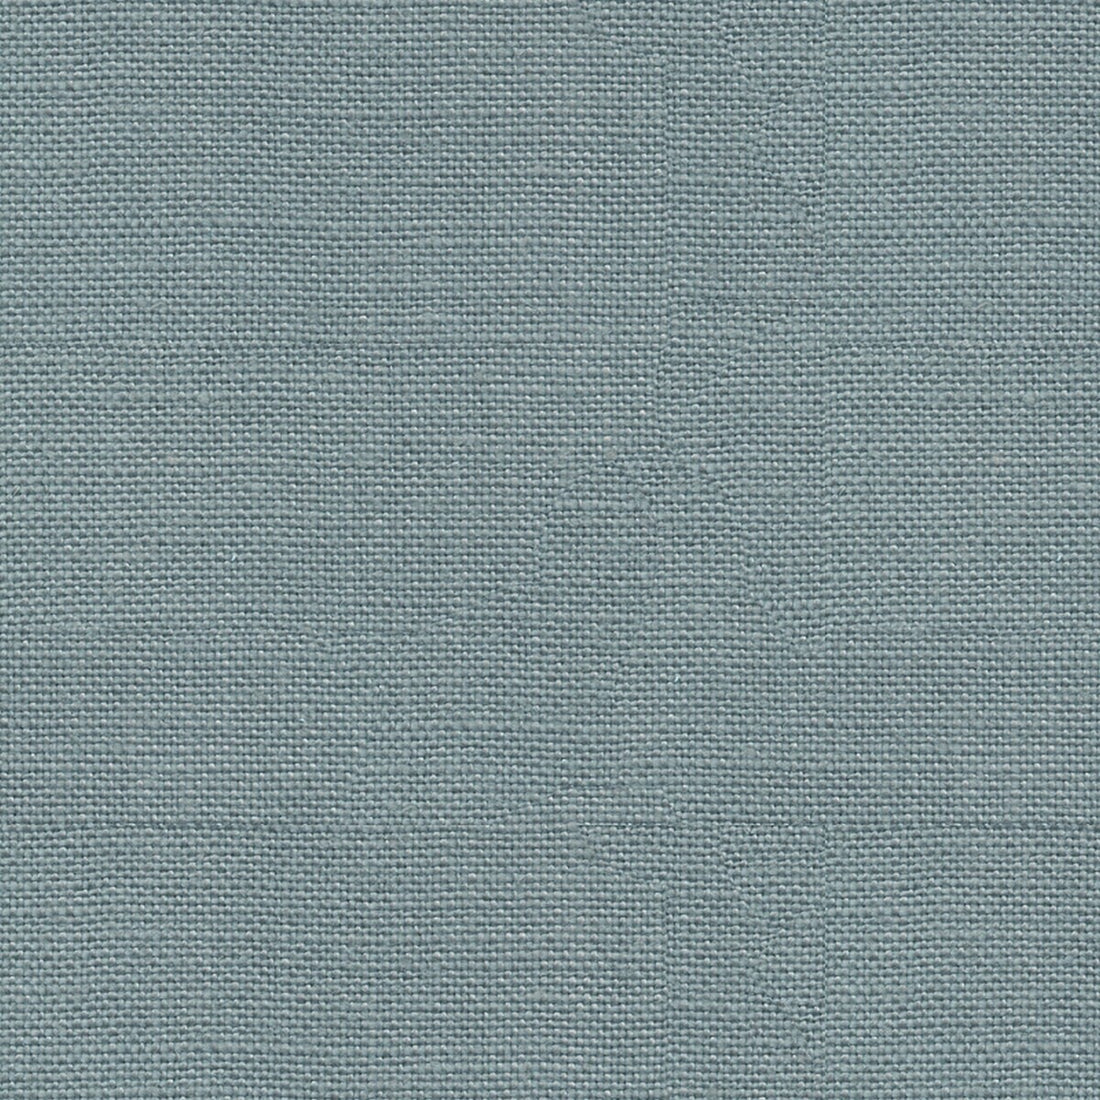 Lea fabric in aqua color - pattern J0337.725.0 - by G P &amp; J Baker in the Crayford collection